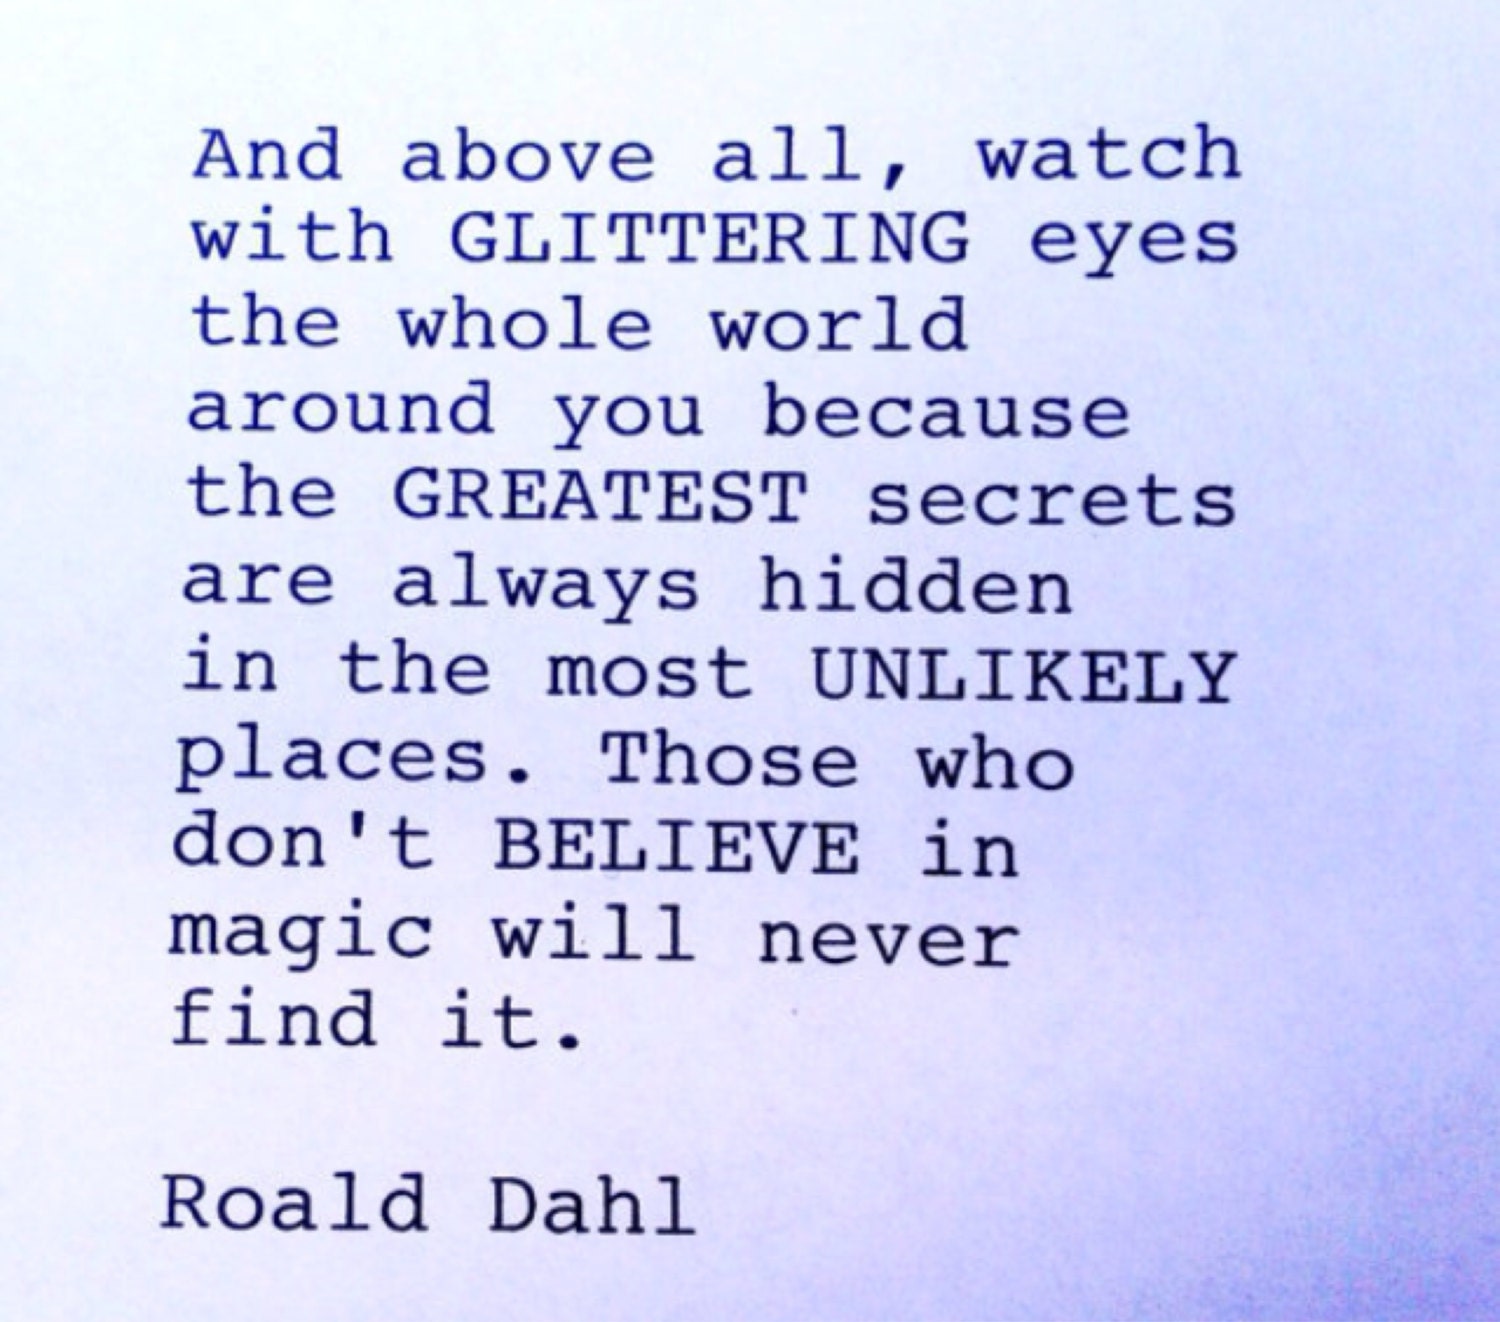 Roald Dahl Hand Typed Typewriter Quote And Above All Watch | Etsy Canada